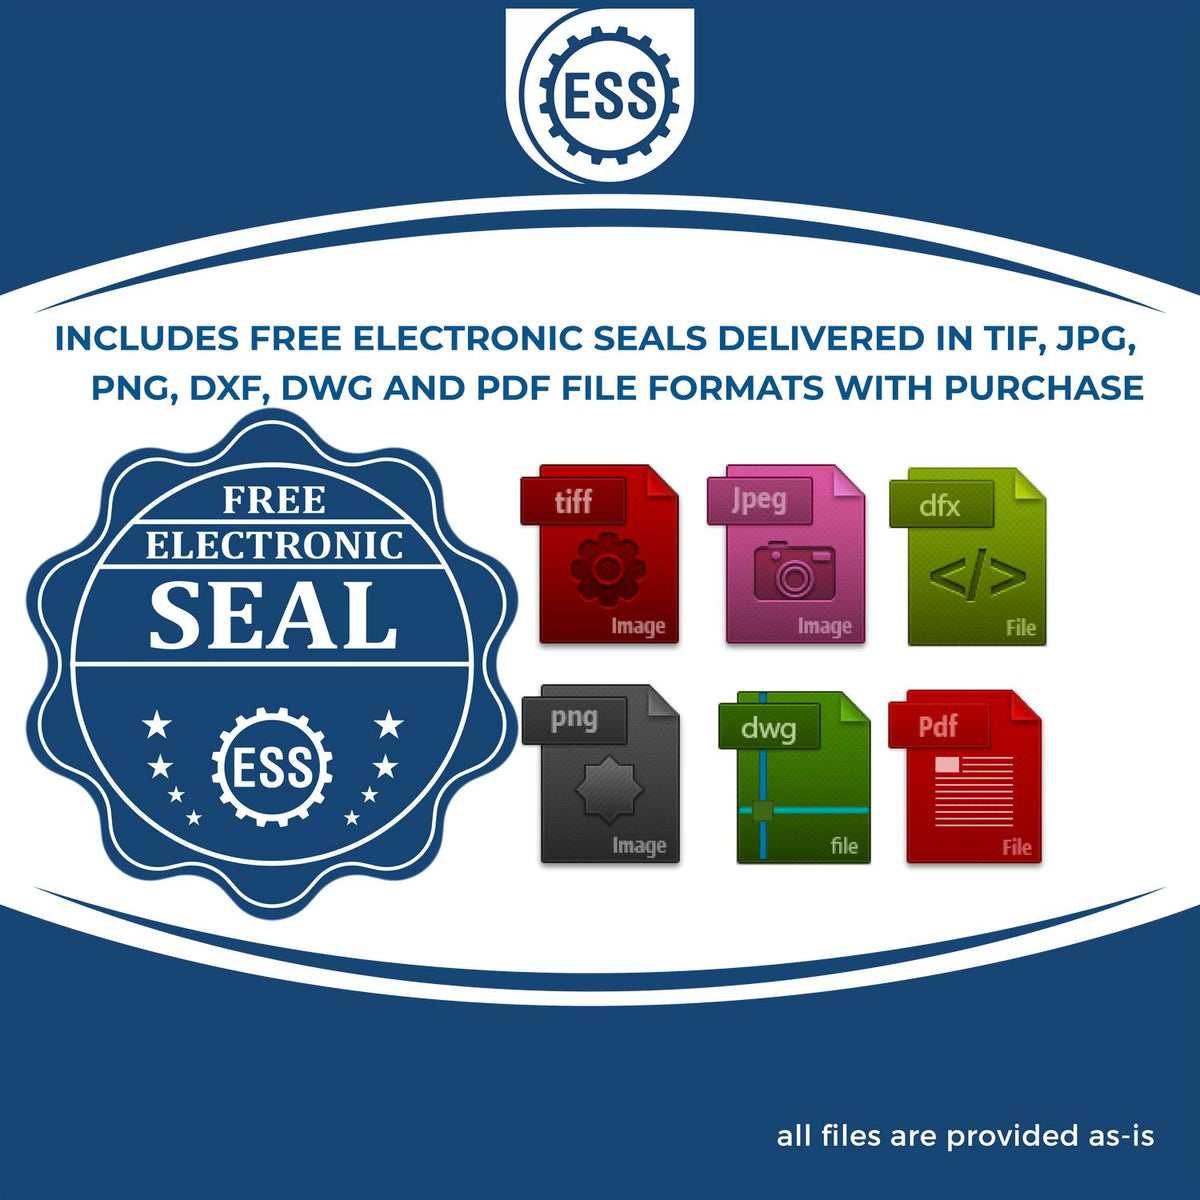 An infographic for the free electronic seal for the Slim Pre-Inked New Mexico Professional Geologist Seal Stamp illustrating the different file type icons such as DXF, DWG, TIF, JPG and PNG.